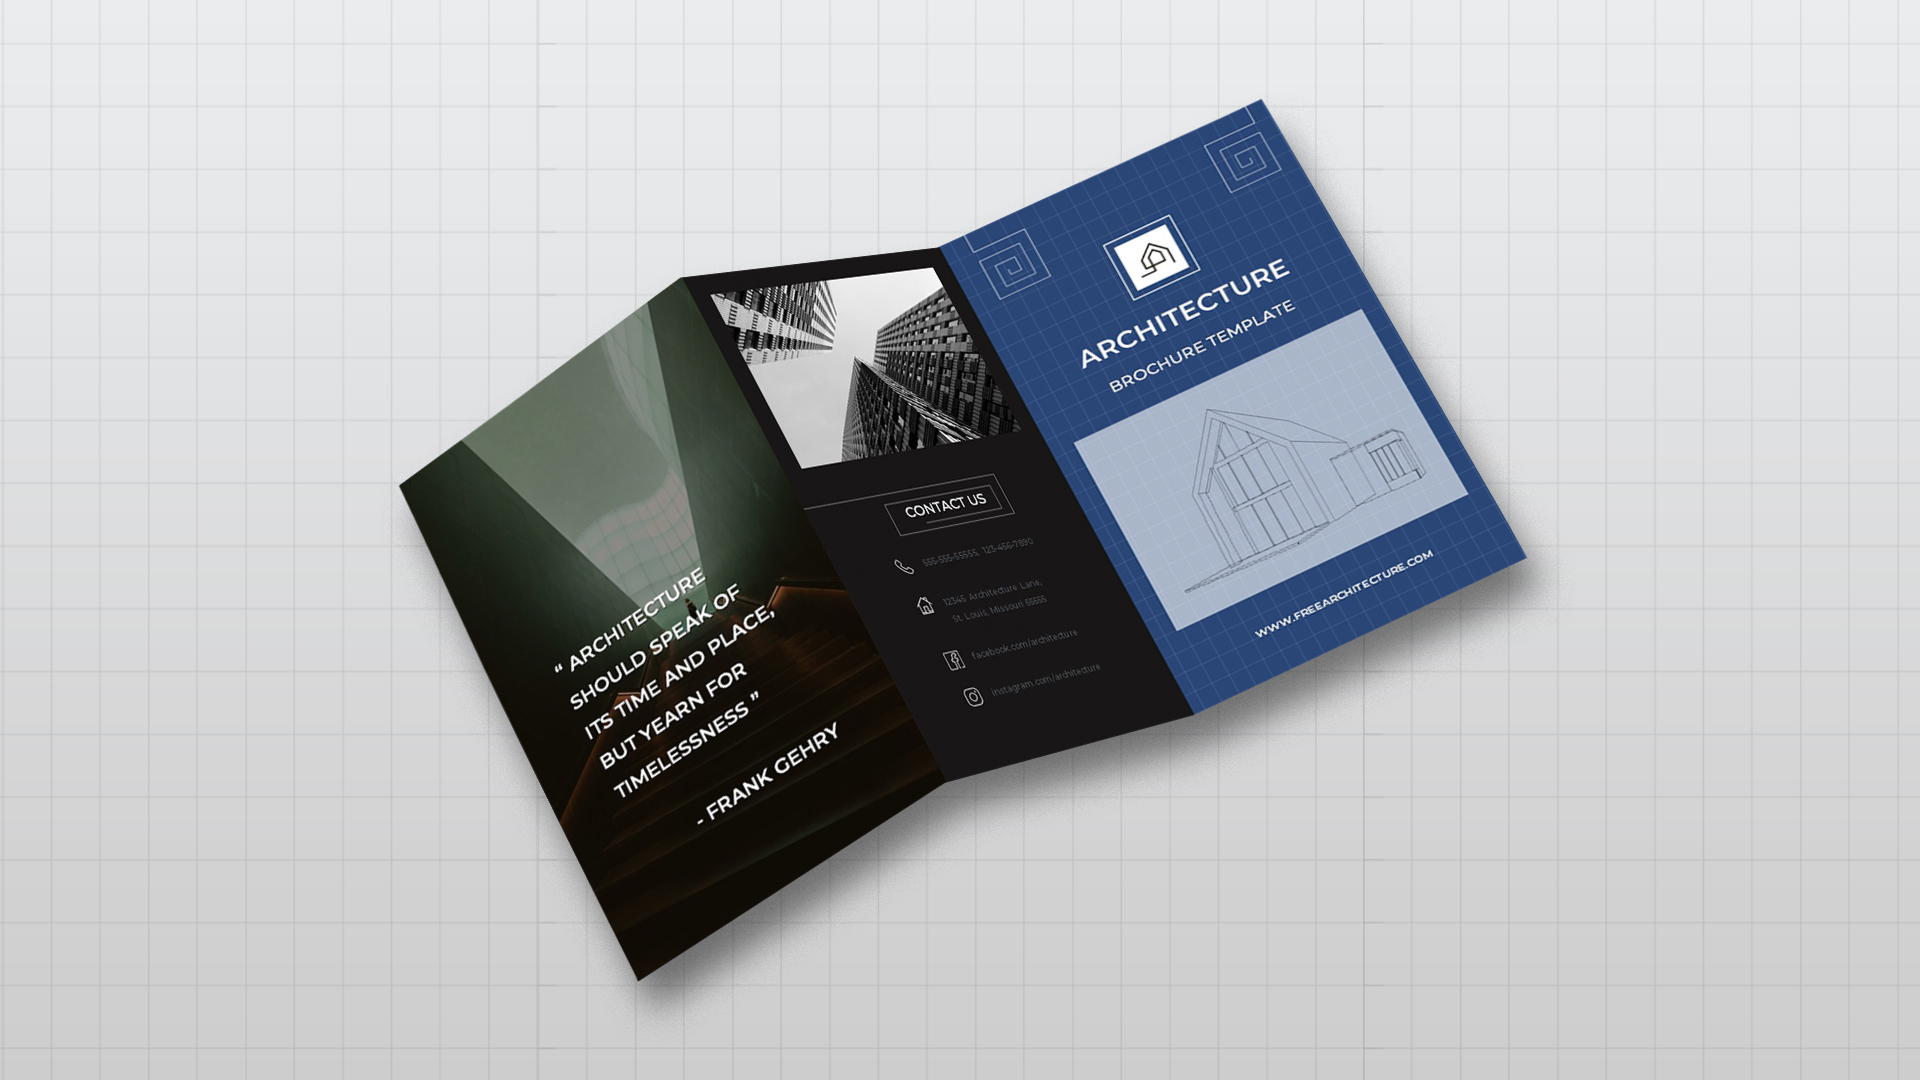 Trifold brochure